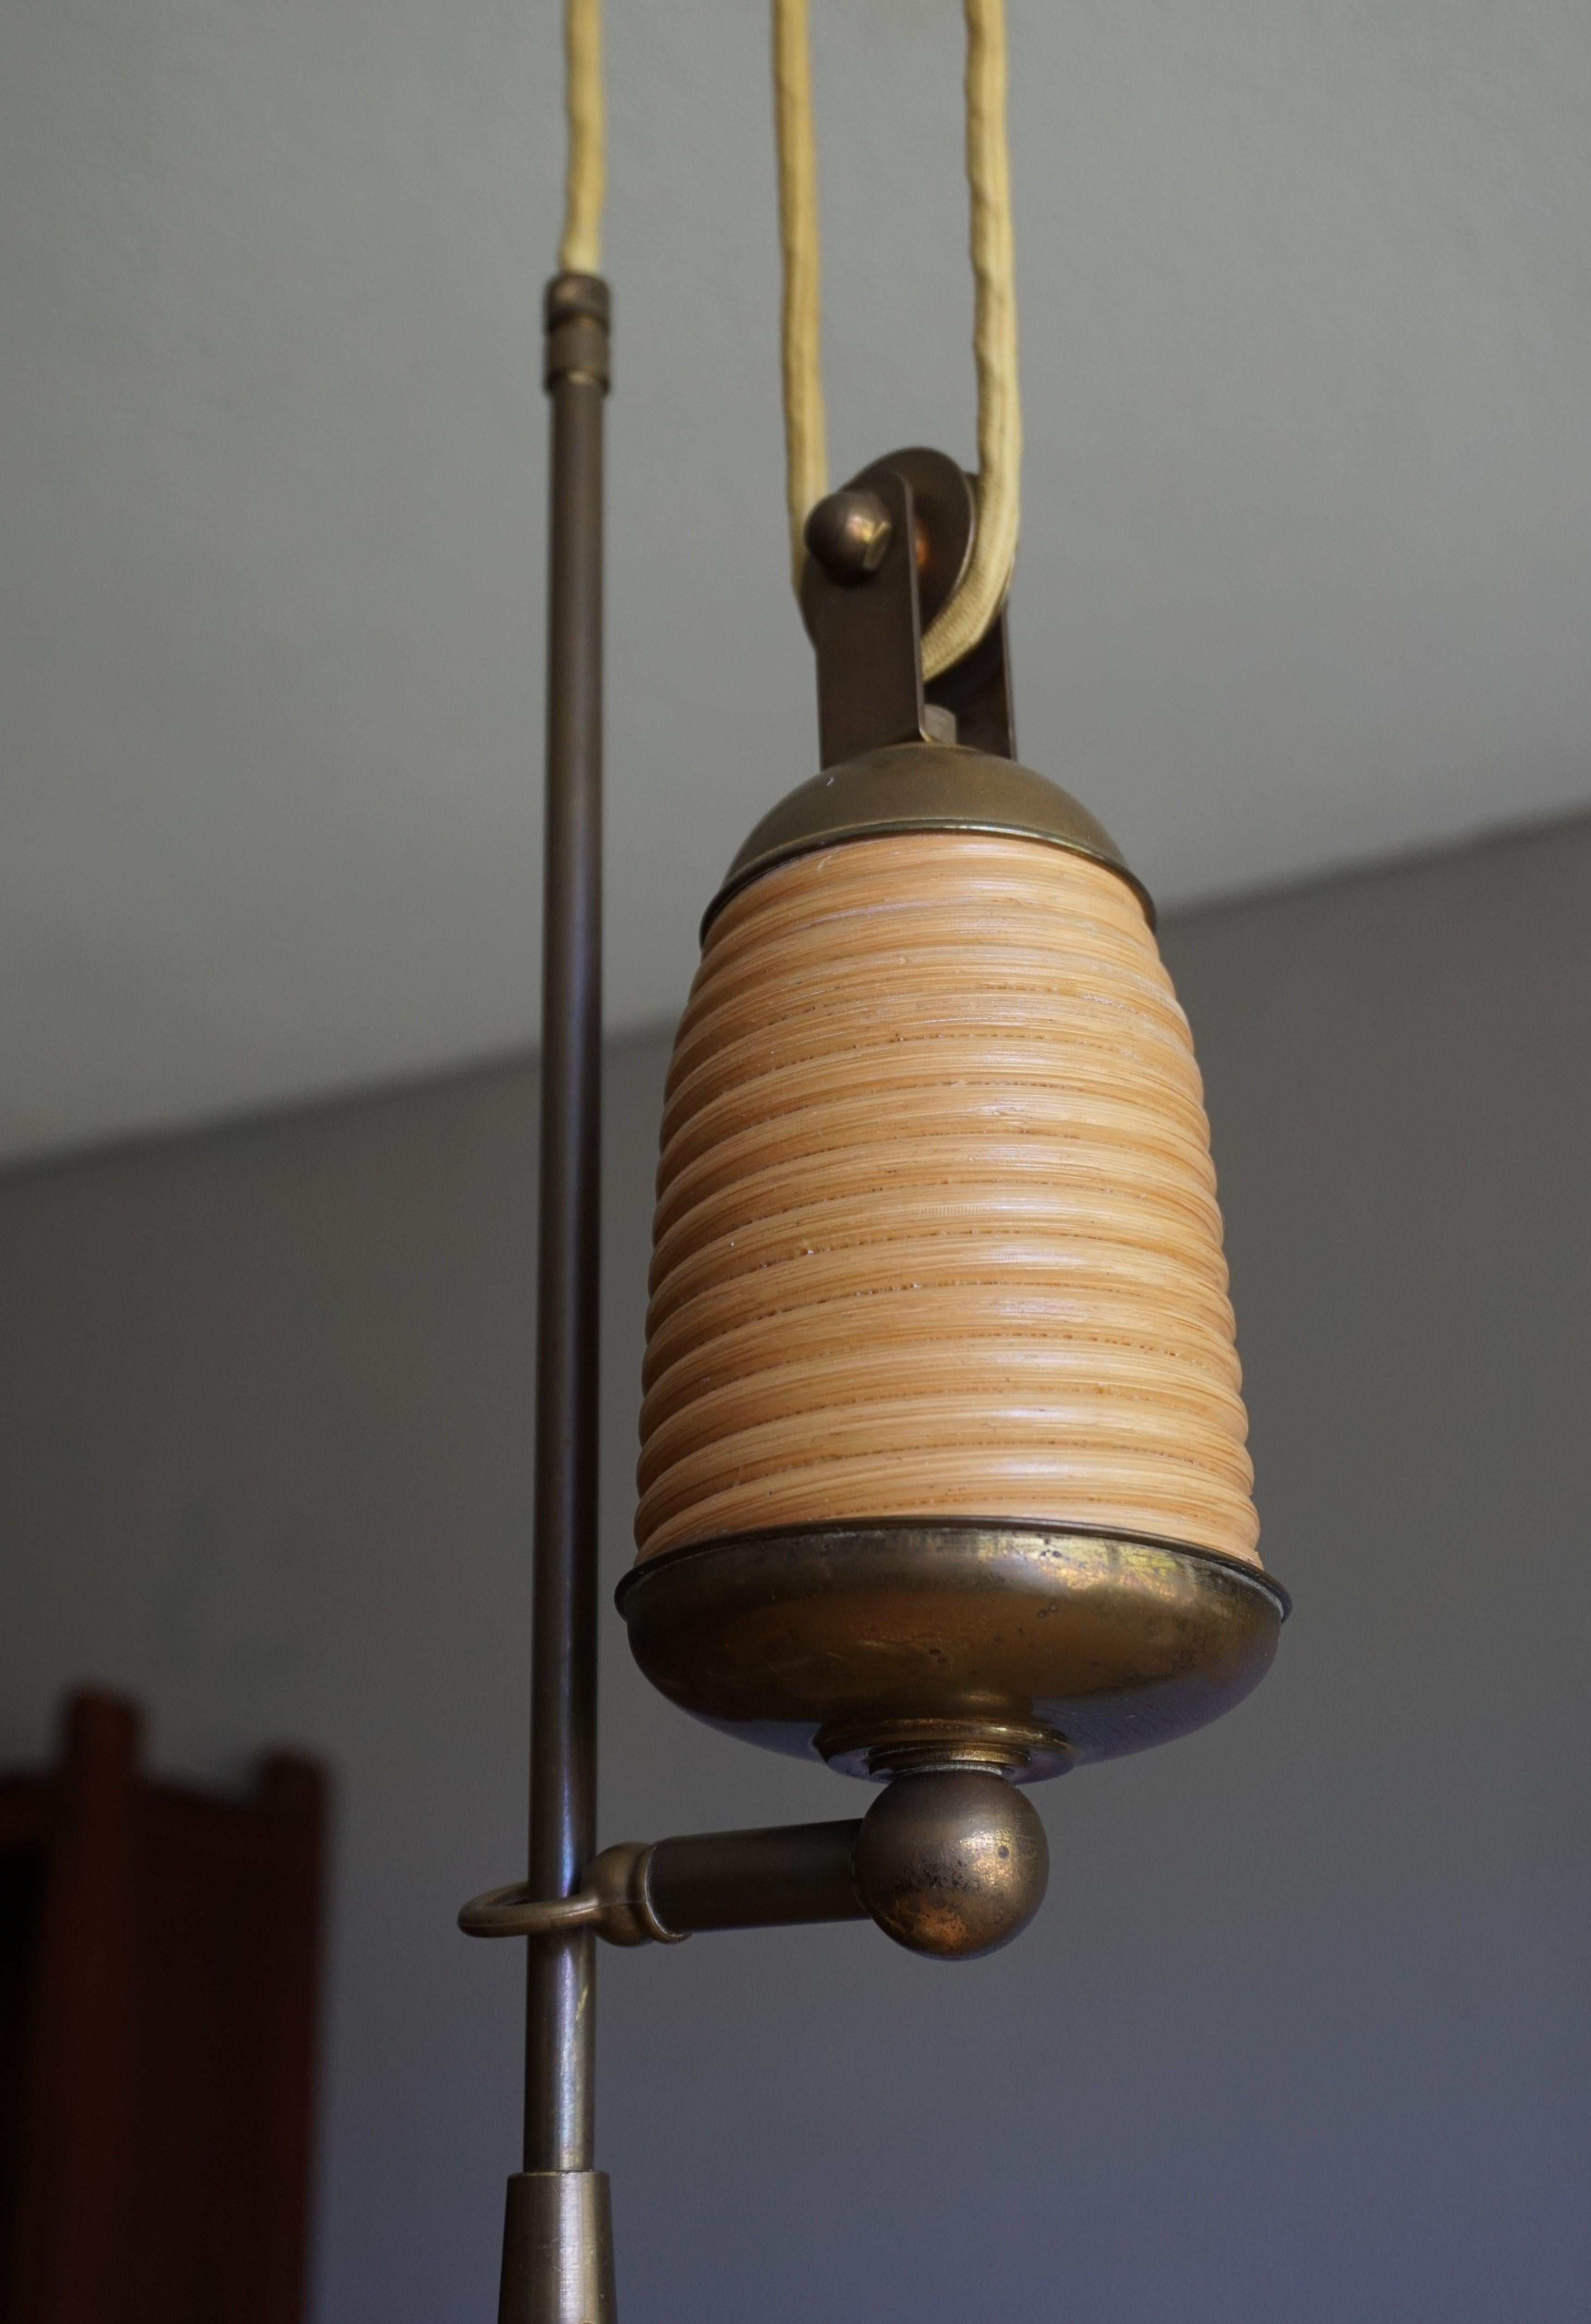 Hand-Crafted Rare & Handcrafted Midcentury Modern Rattan & Brass Pendant Light / Ceiling Lamp